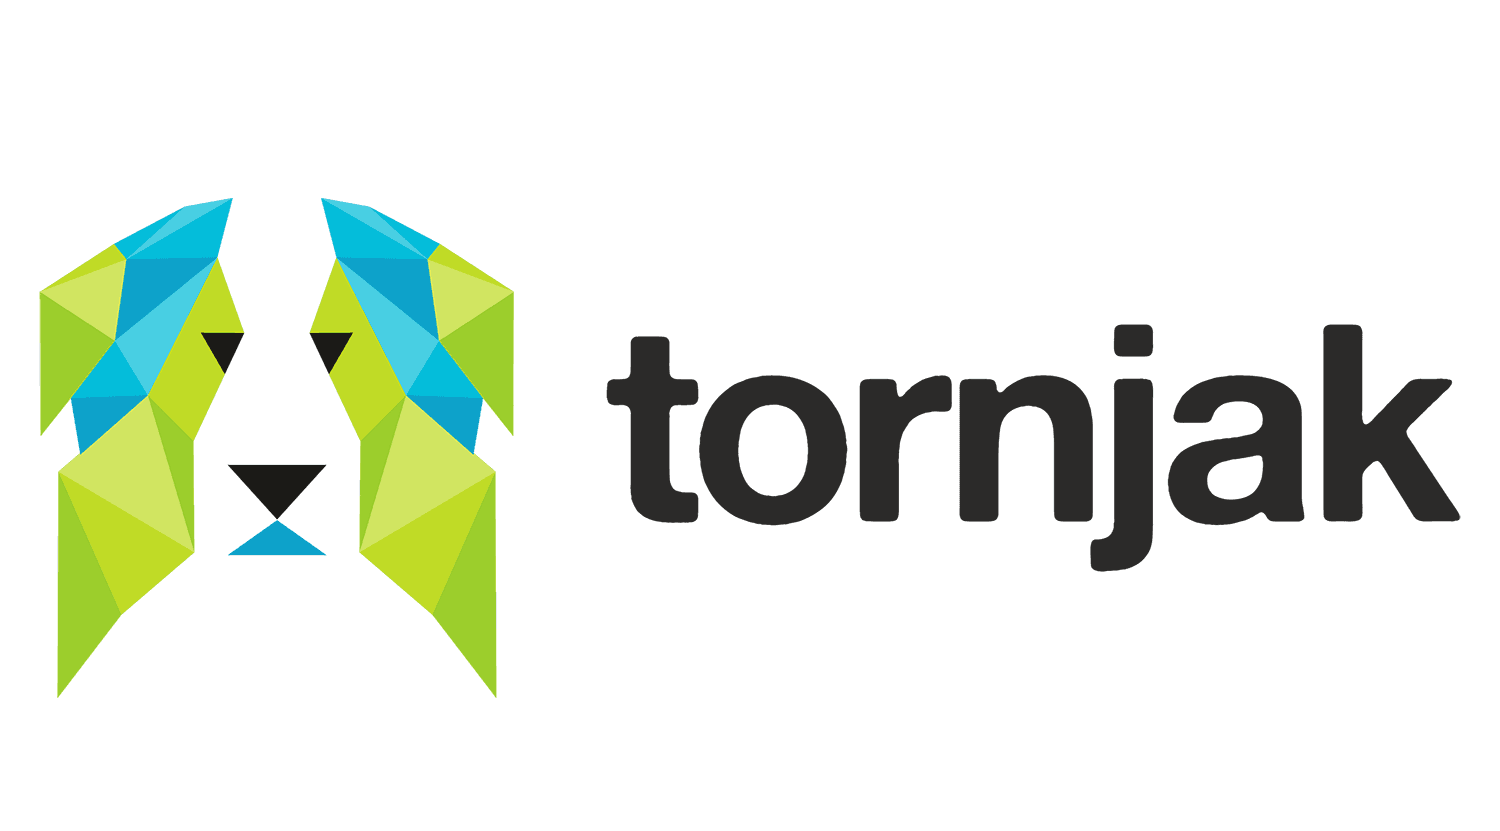 IBM open sourcing project “Tornjak” logo.